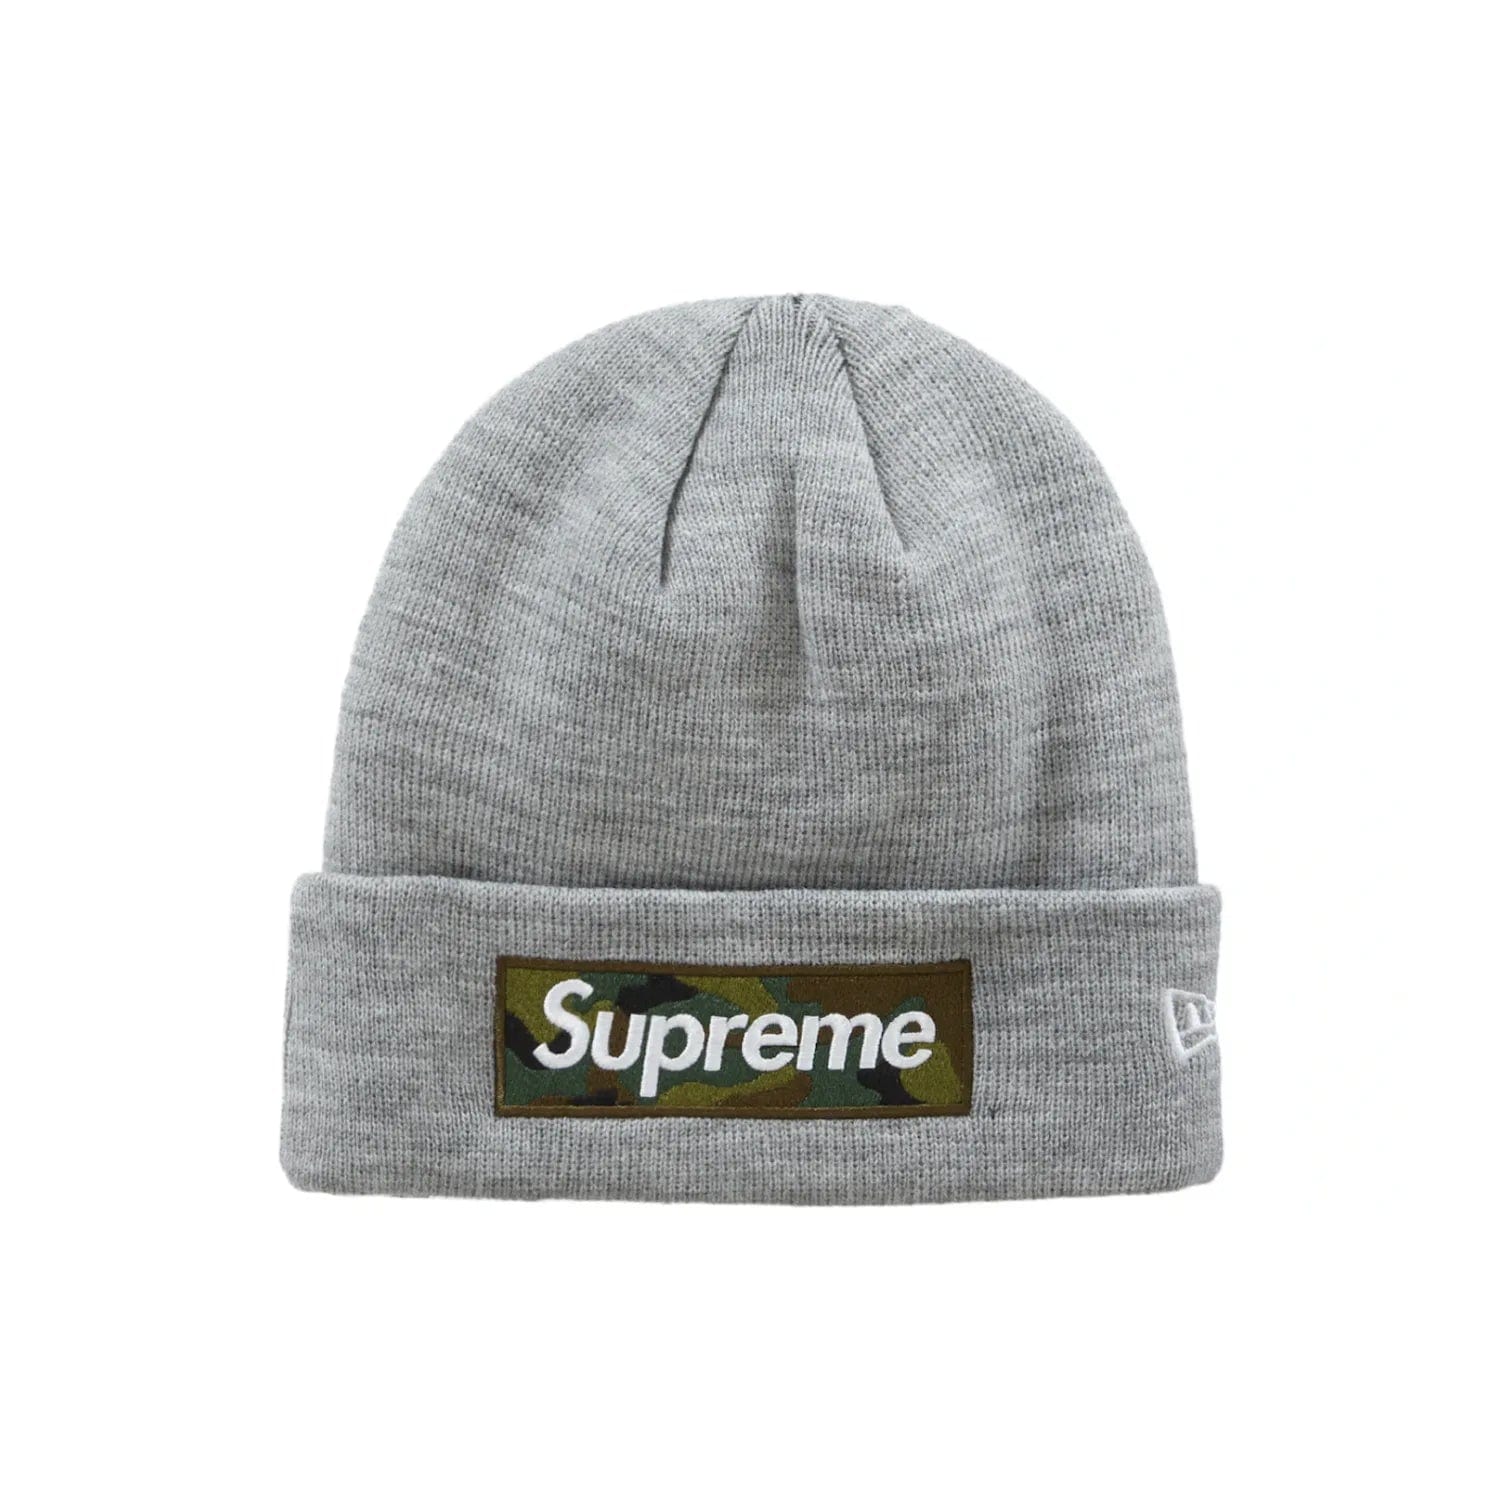 Supreme New Era Box Logo Beanie (FW23) Heather Grey - Image 1 - Only at www.BallersClubKickz.com - New Era Box Logo Beanie from Supreme for FW23. Soft Heather Grey hue with iconic Supreme logo. Get yours today and add some style to your look!